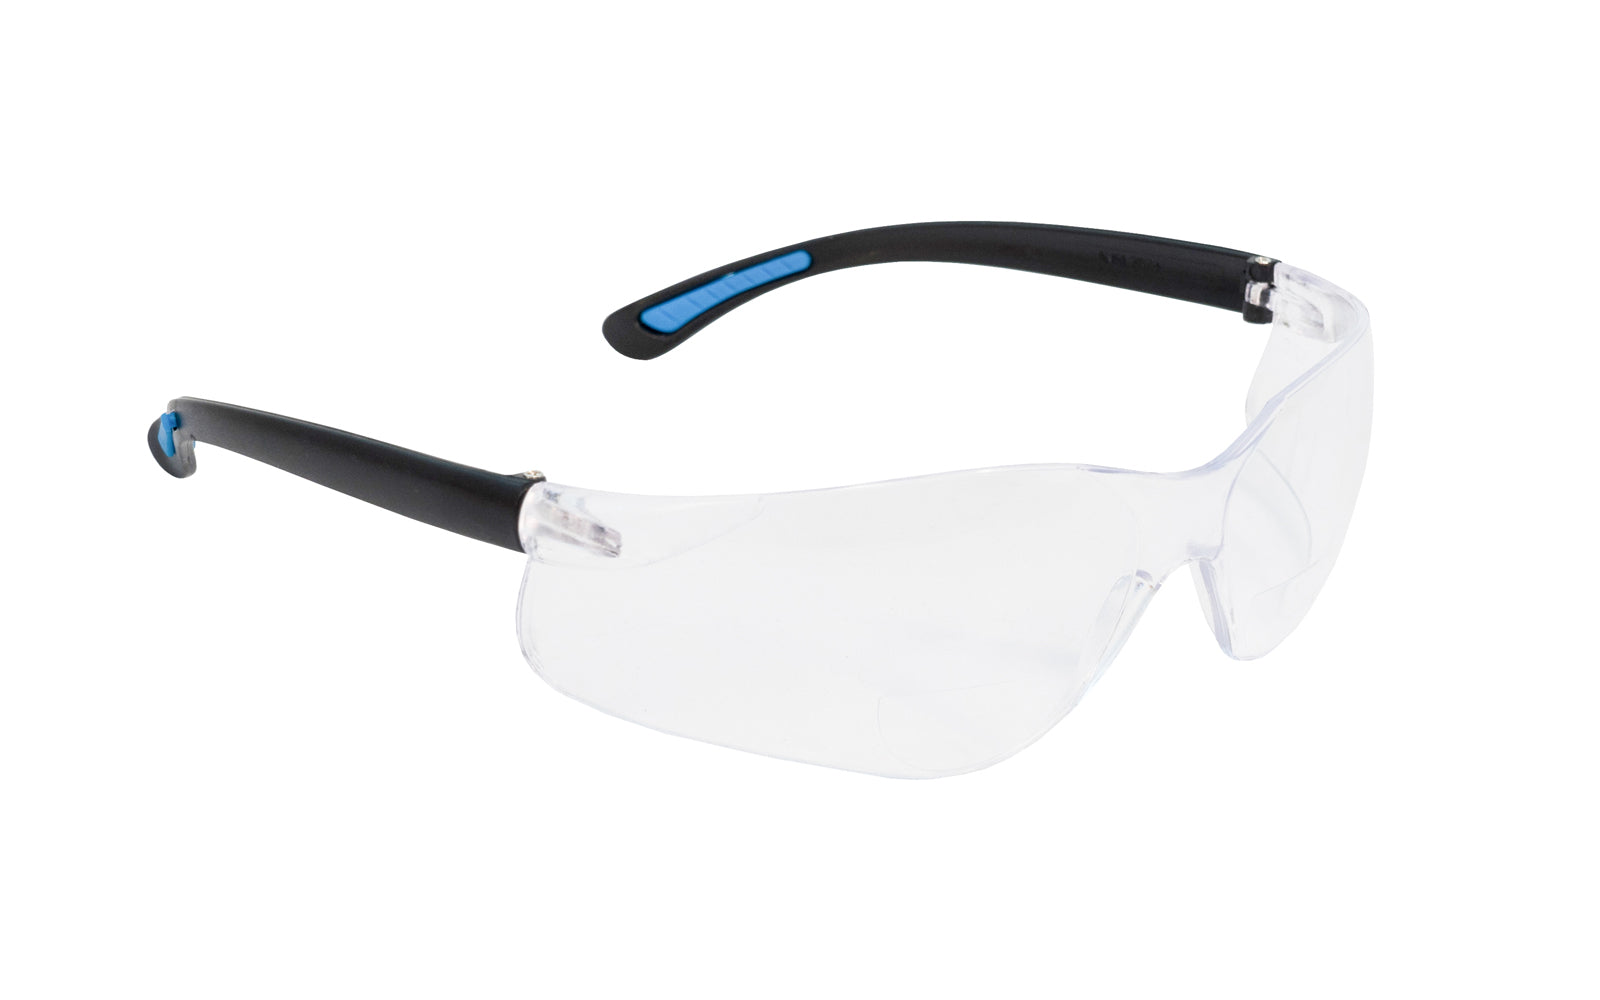 Fastcap Magnifying Safety Glasses have clear lenses & available in 1.5, 2.0, 2.5, 3.0 BiFocal Diopter Magnifications. Great for shop & also good for outdoor sporting activities. Anti-fog & anti-static lenses. FastCap "CatEyes" Safety Mags. Clear lenses. UV Protection - UVB 95% UVA 60%. shatterproof & scratch resistant 